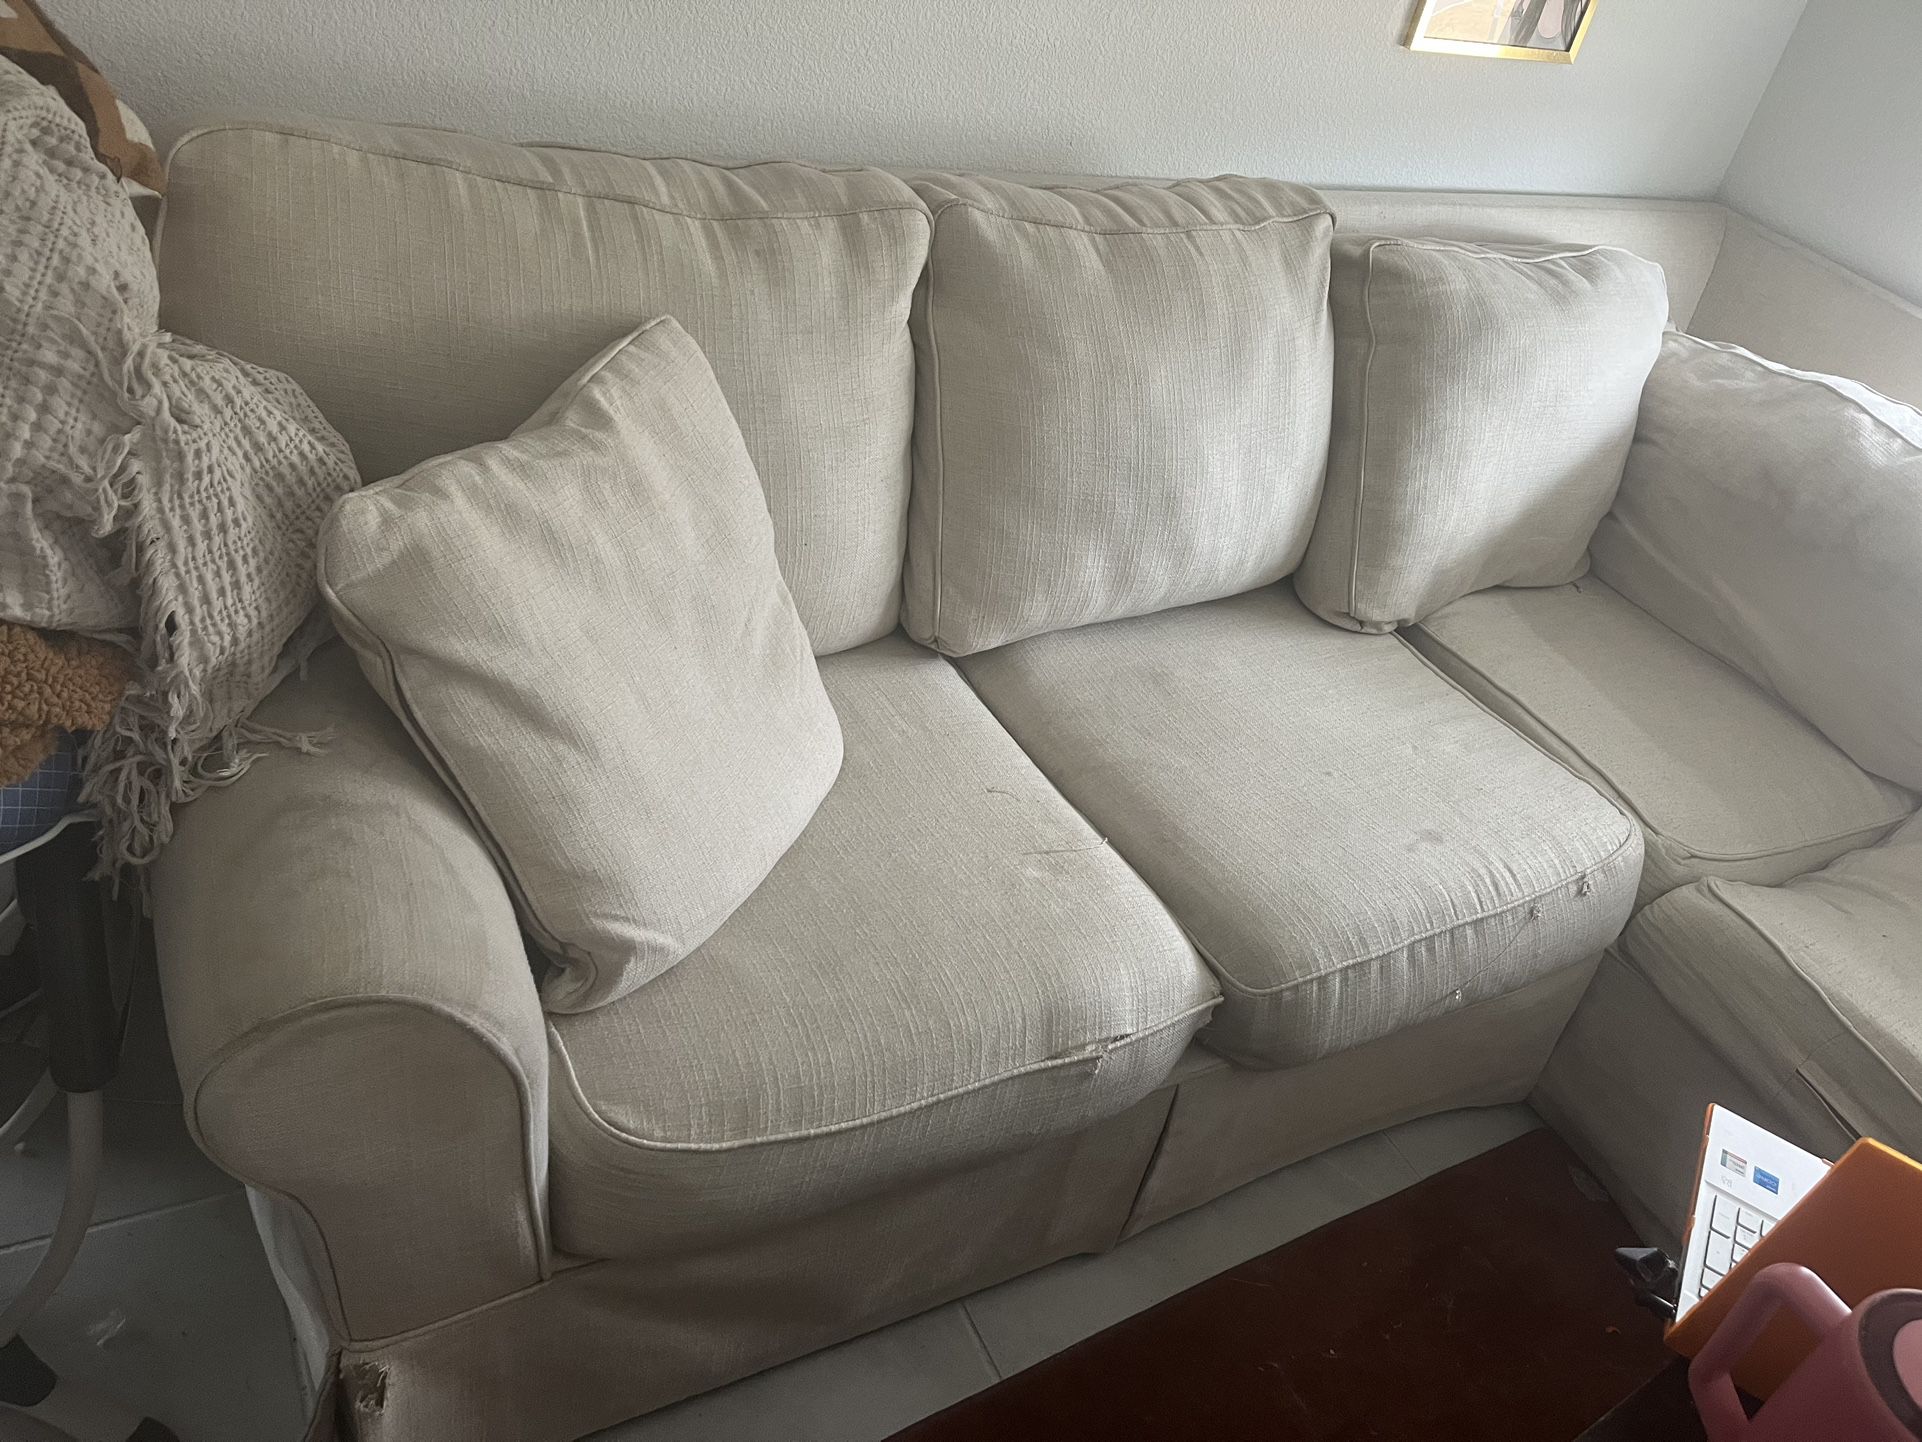 PENDING- FREE COUCH 